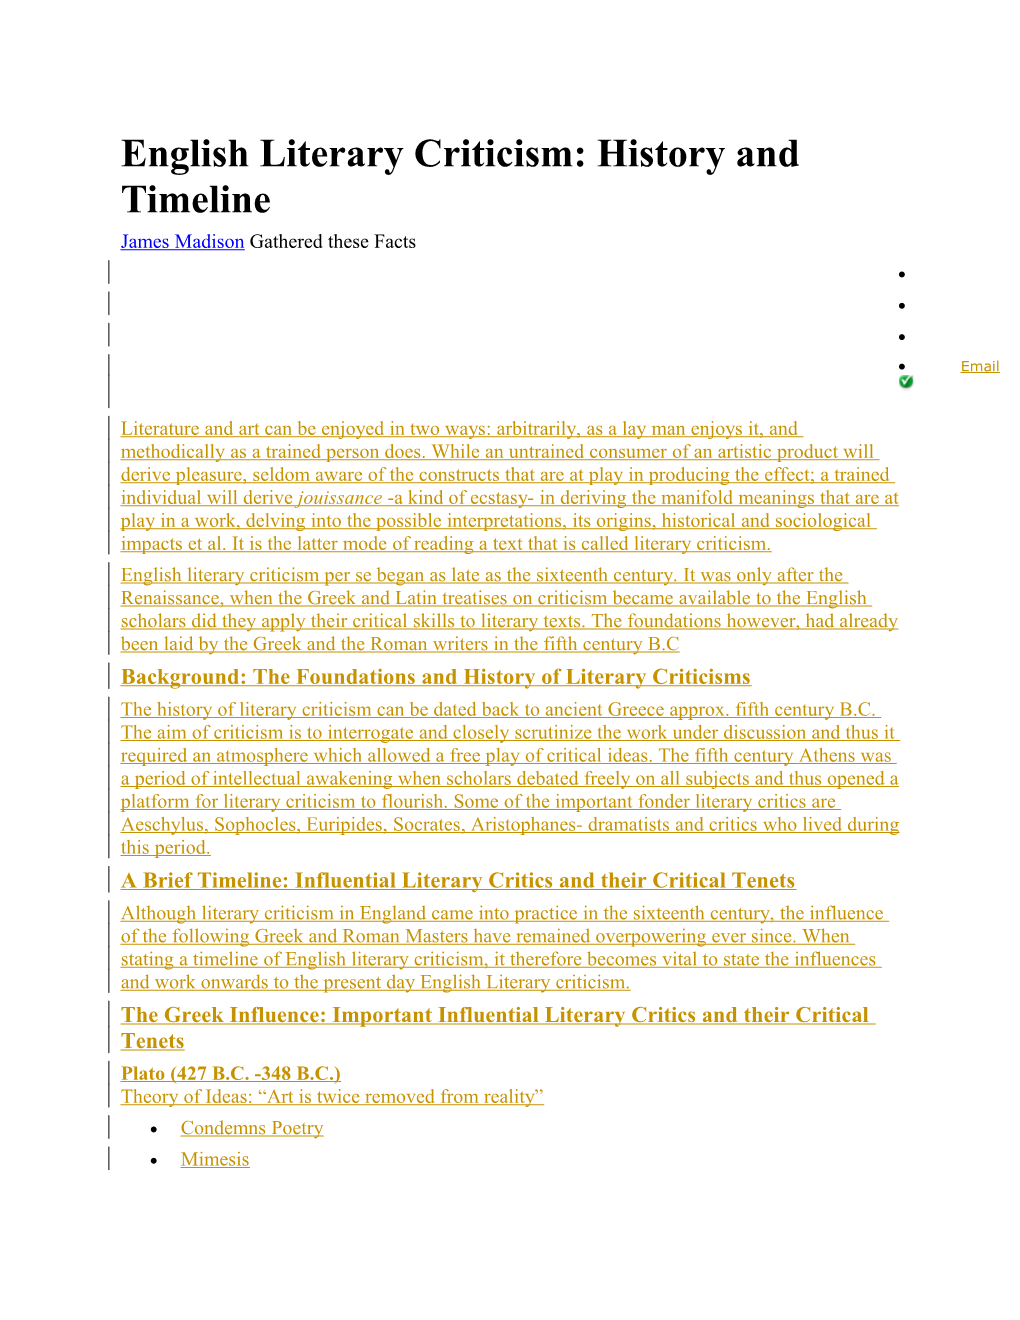 English Literary Criticism: History and Timeline